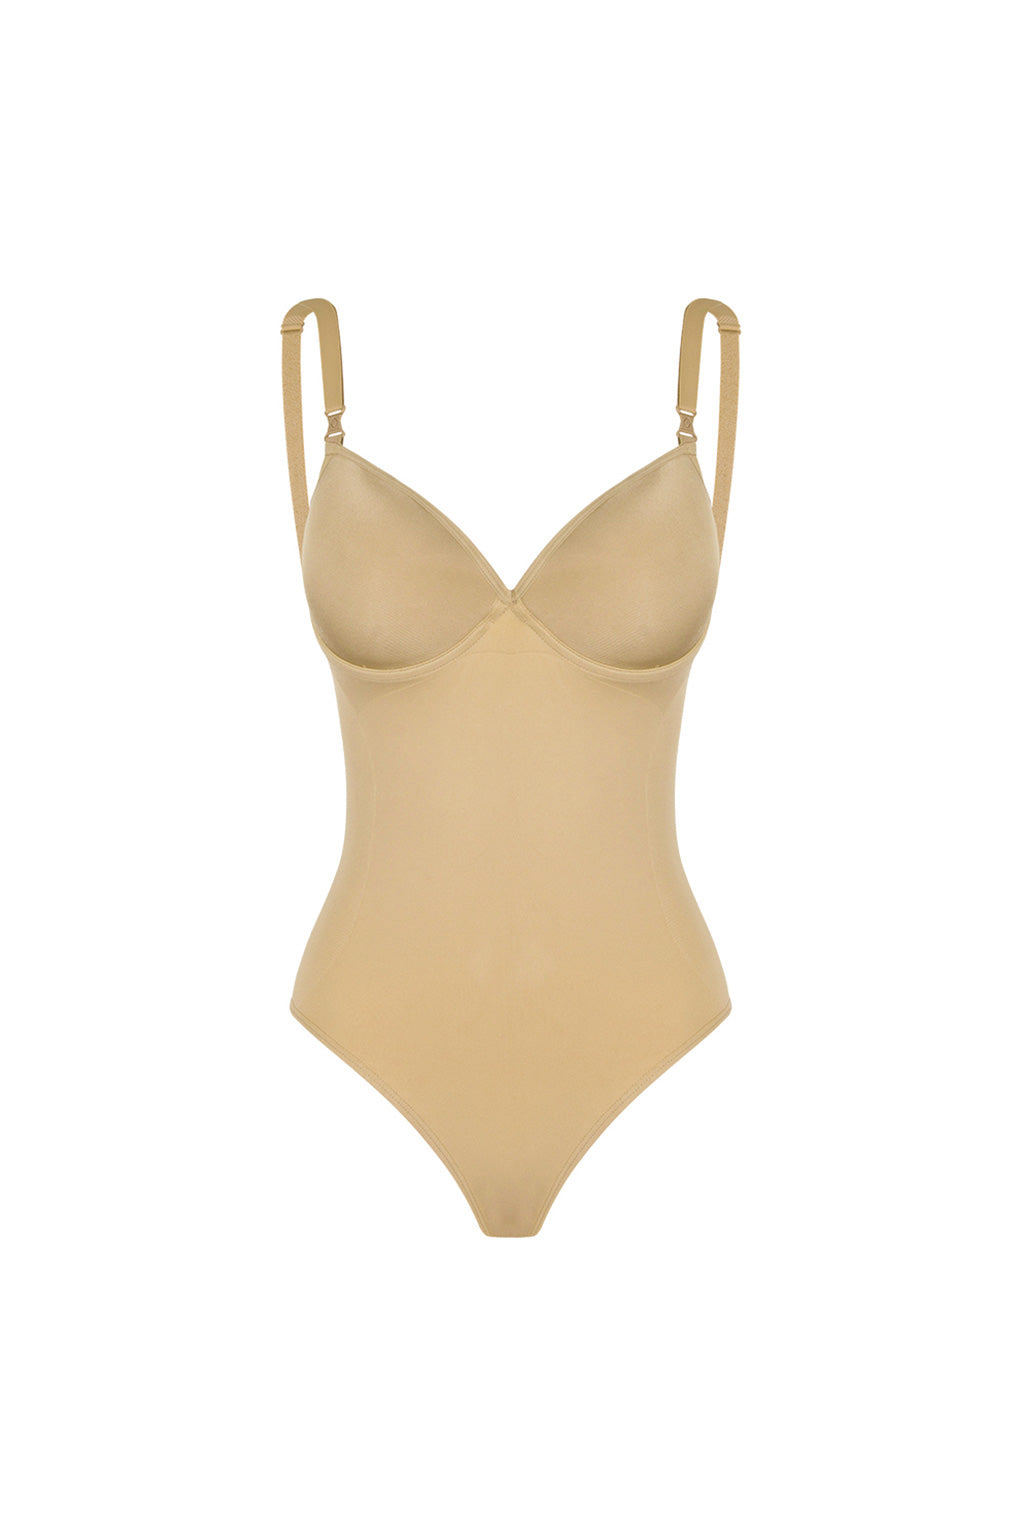 Loba Slim Seamless Body with Padded Cups Bra by Lupo